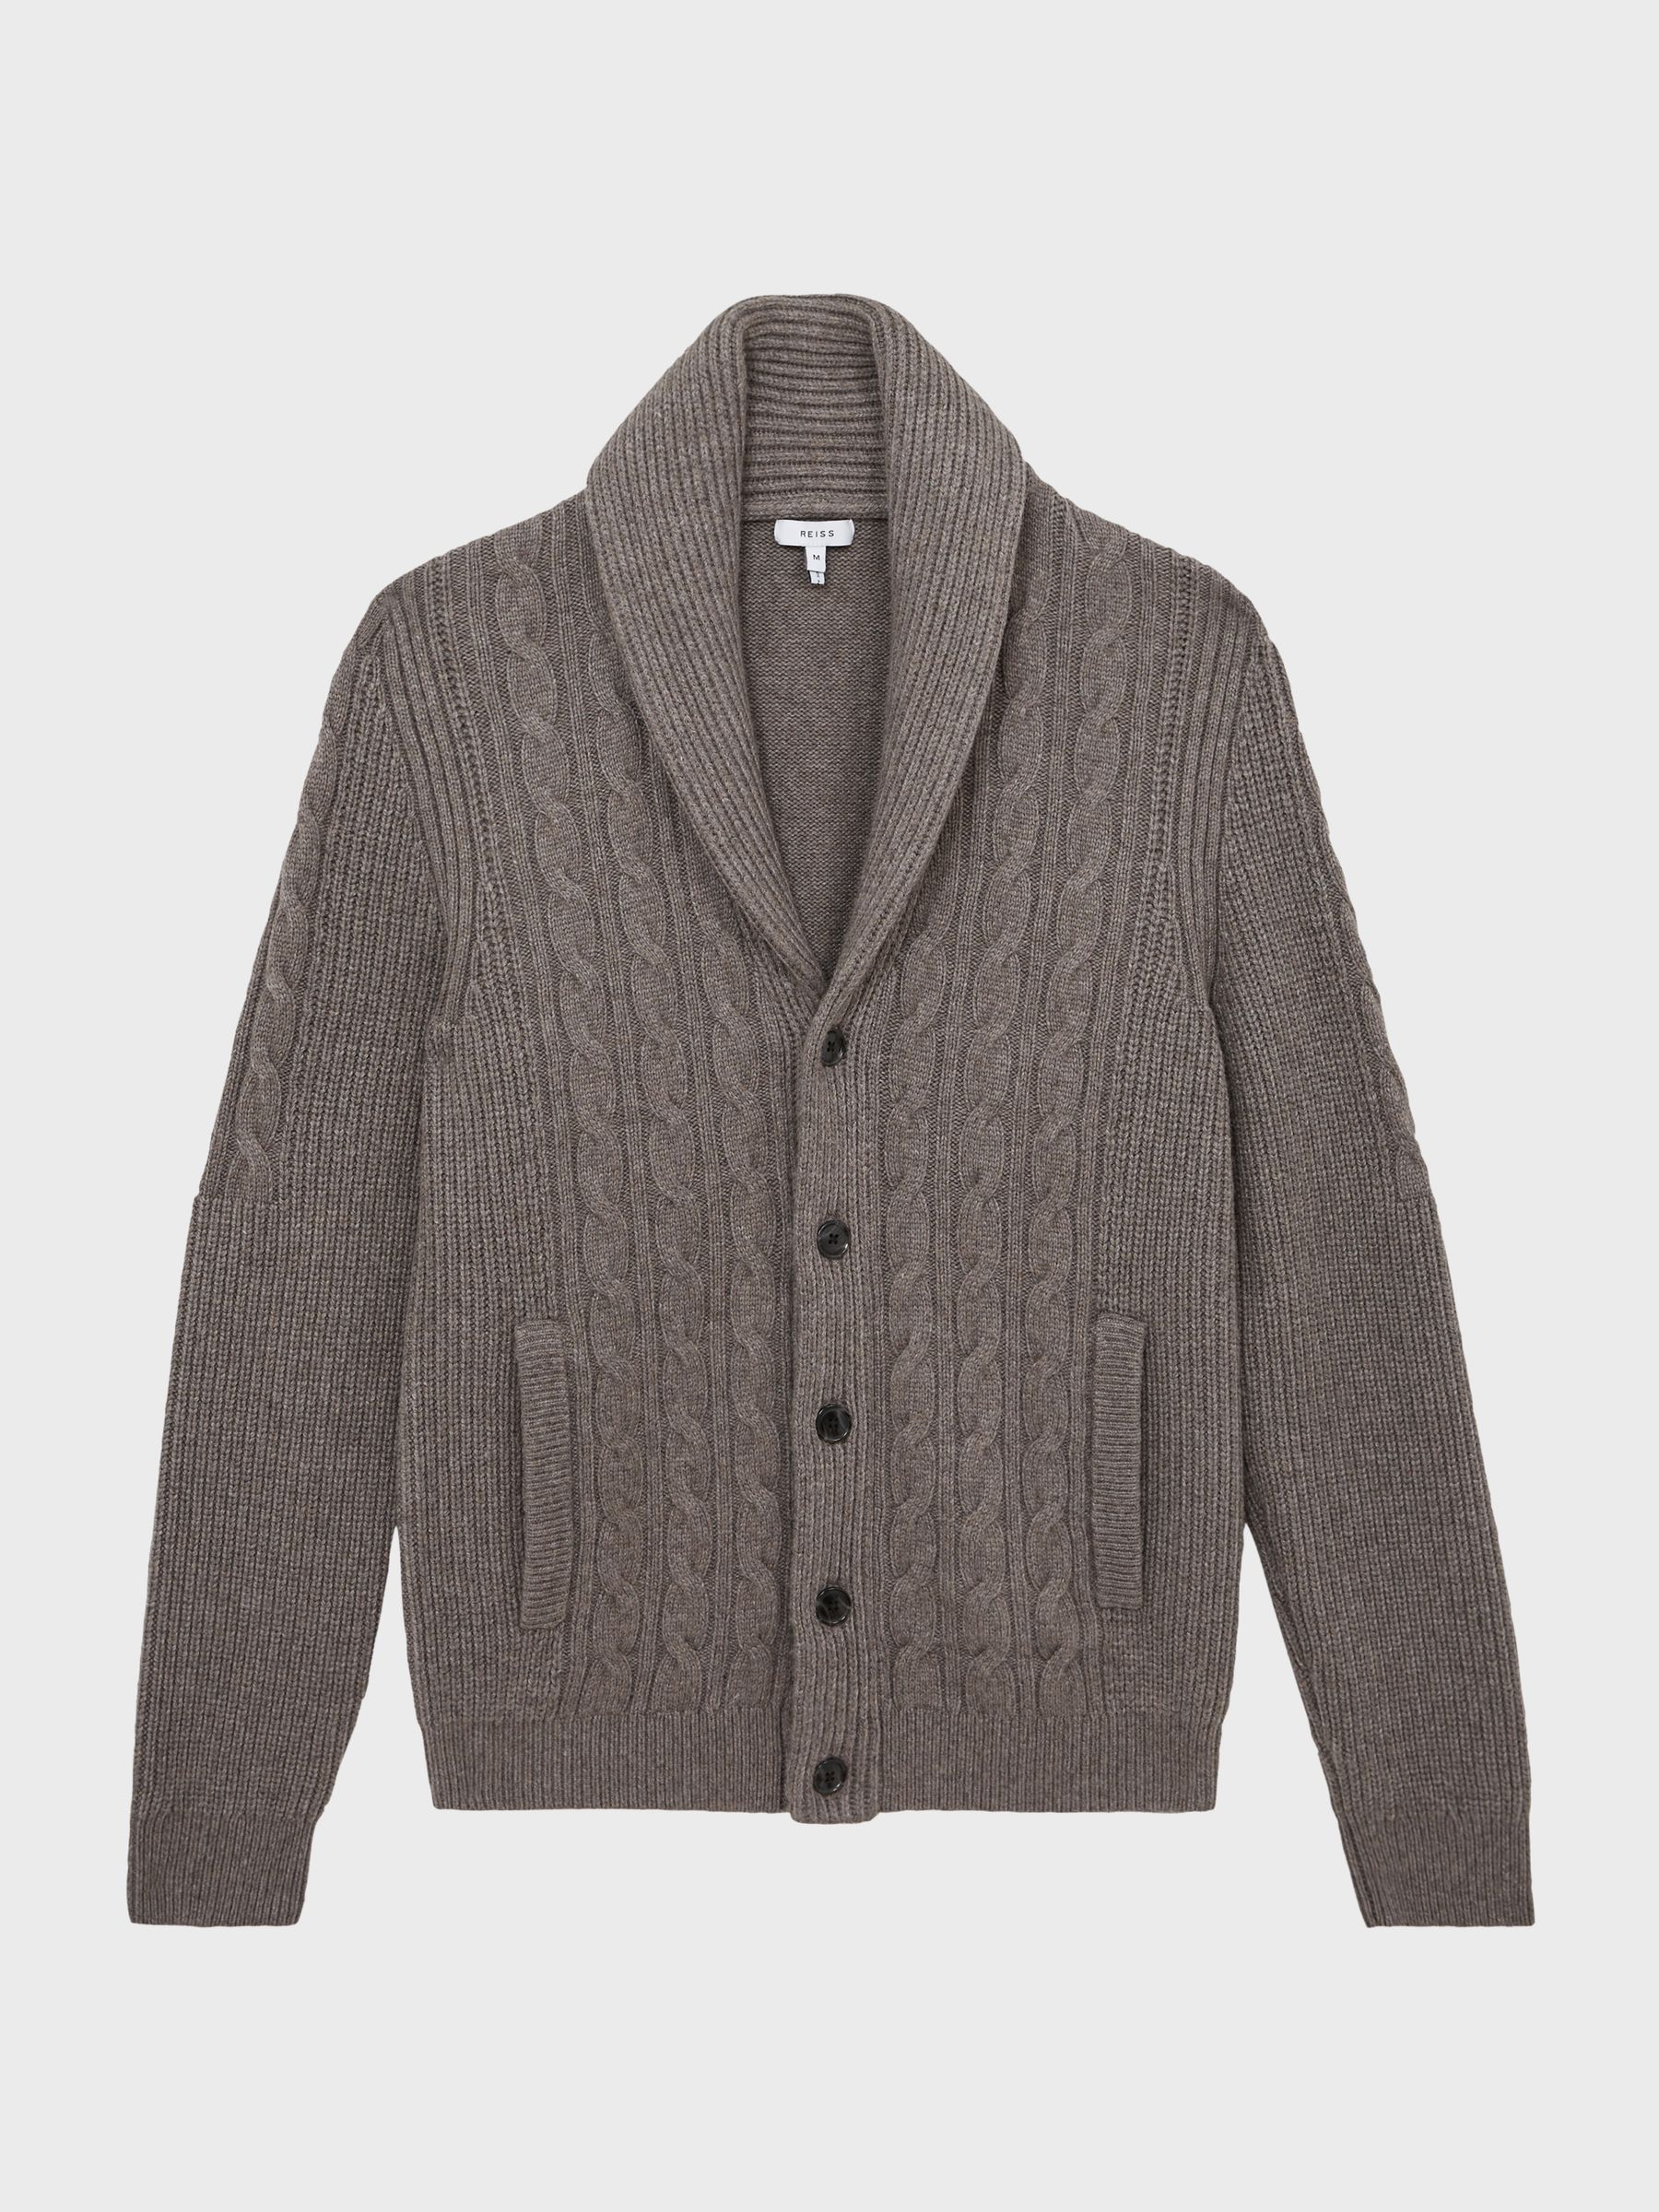 Reiss Romash Shawl Collar Cable Knit Wool Cashmere Cardigan - REISS